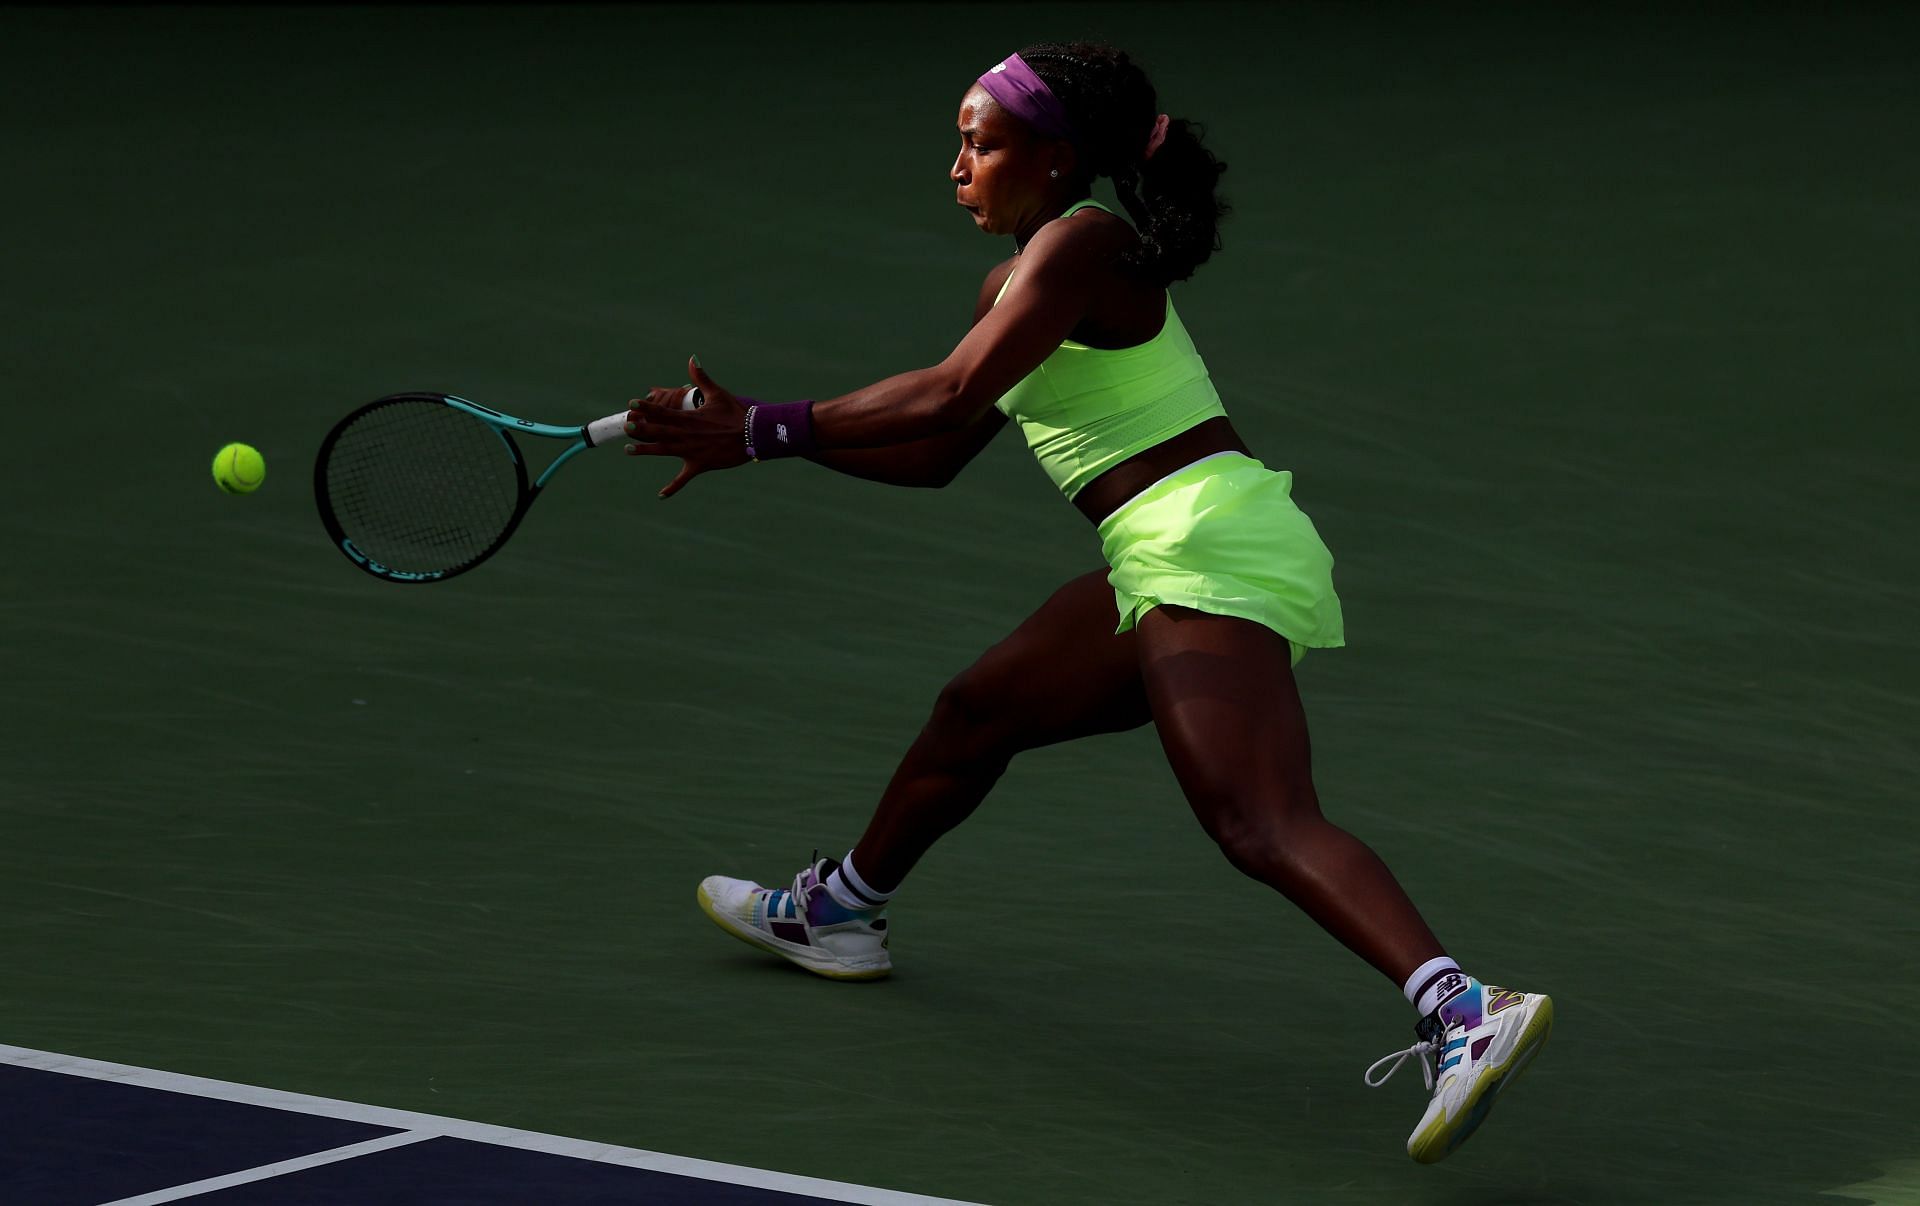 Gauff in action at the BNP Paribas Open in Indian Wells